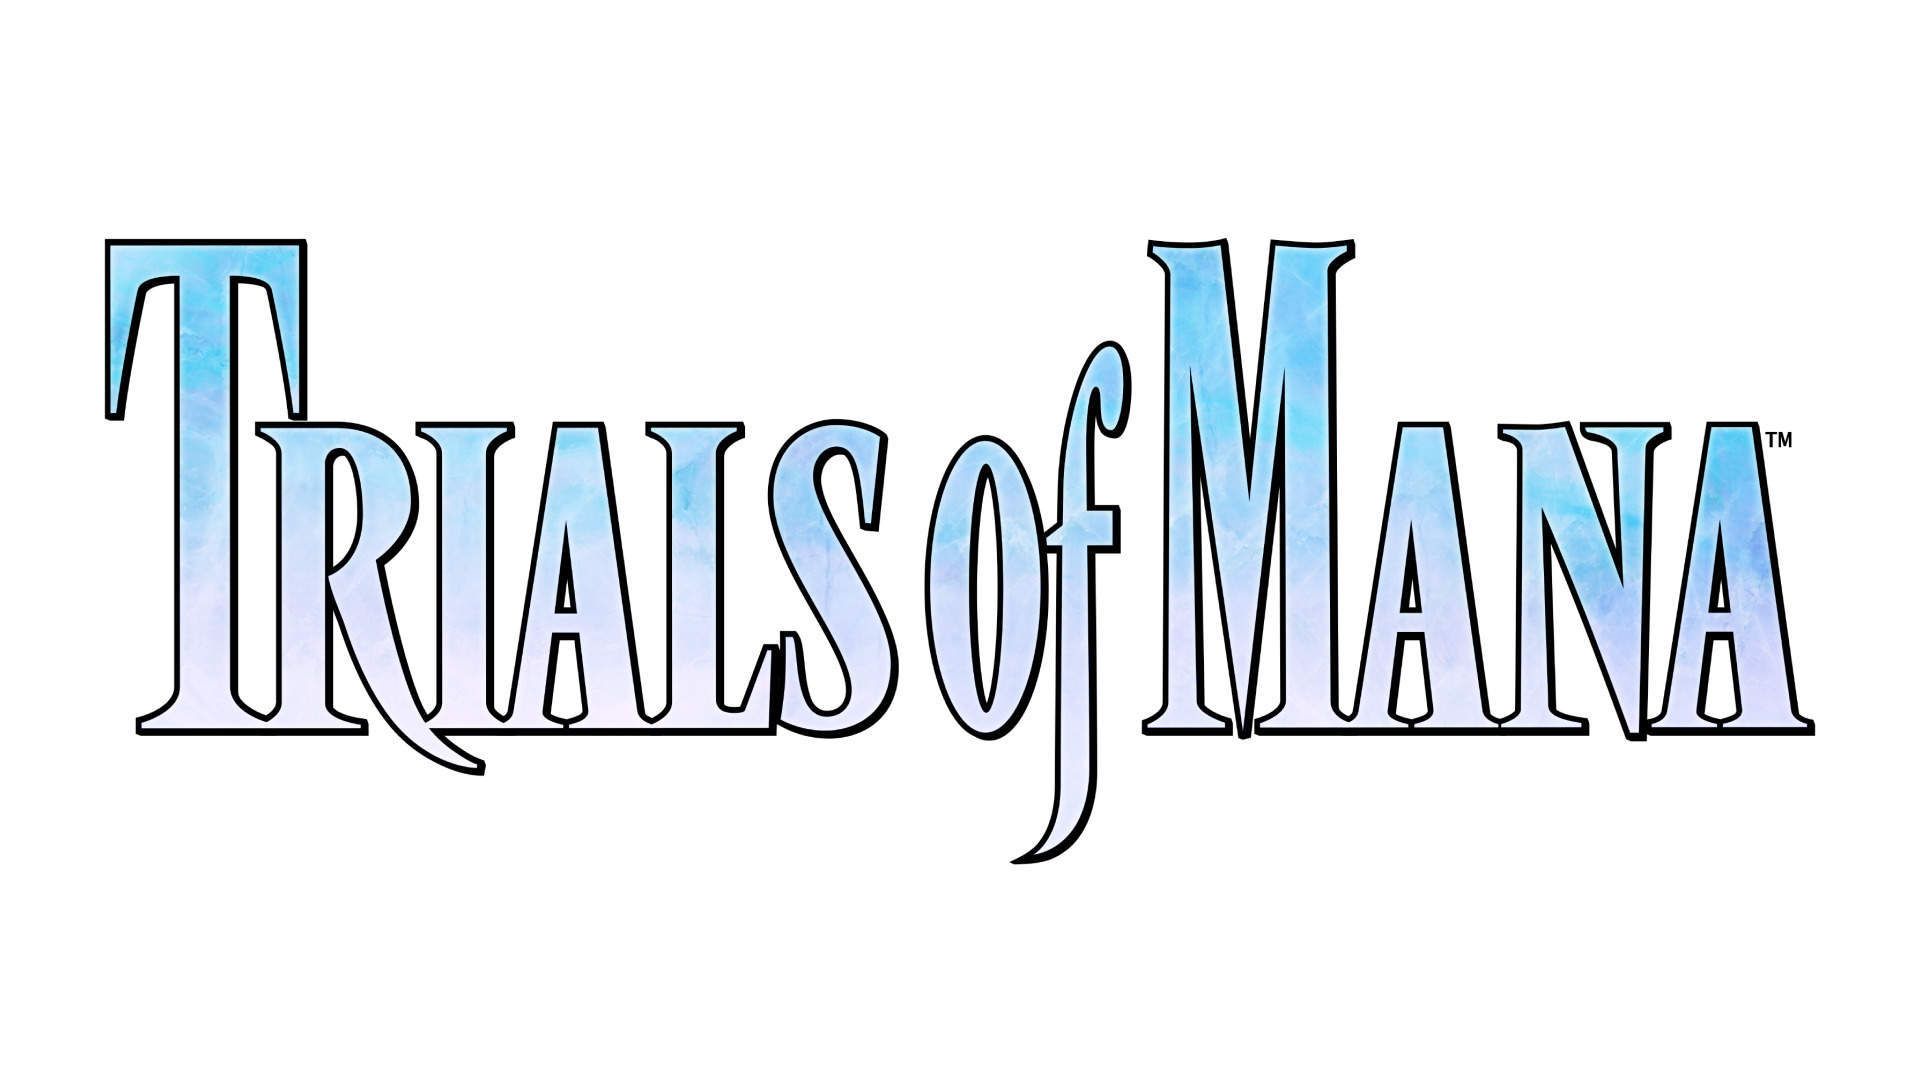 Trials of Mana to play on Switch, PS4 and Steam. Square